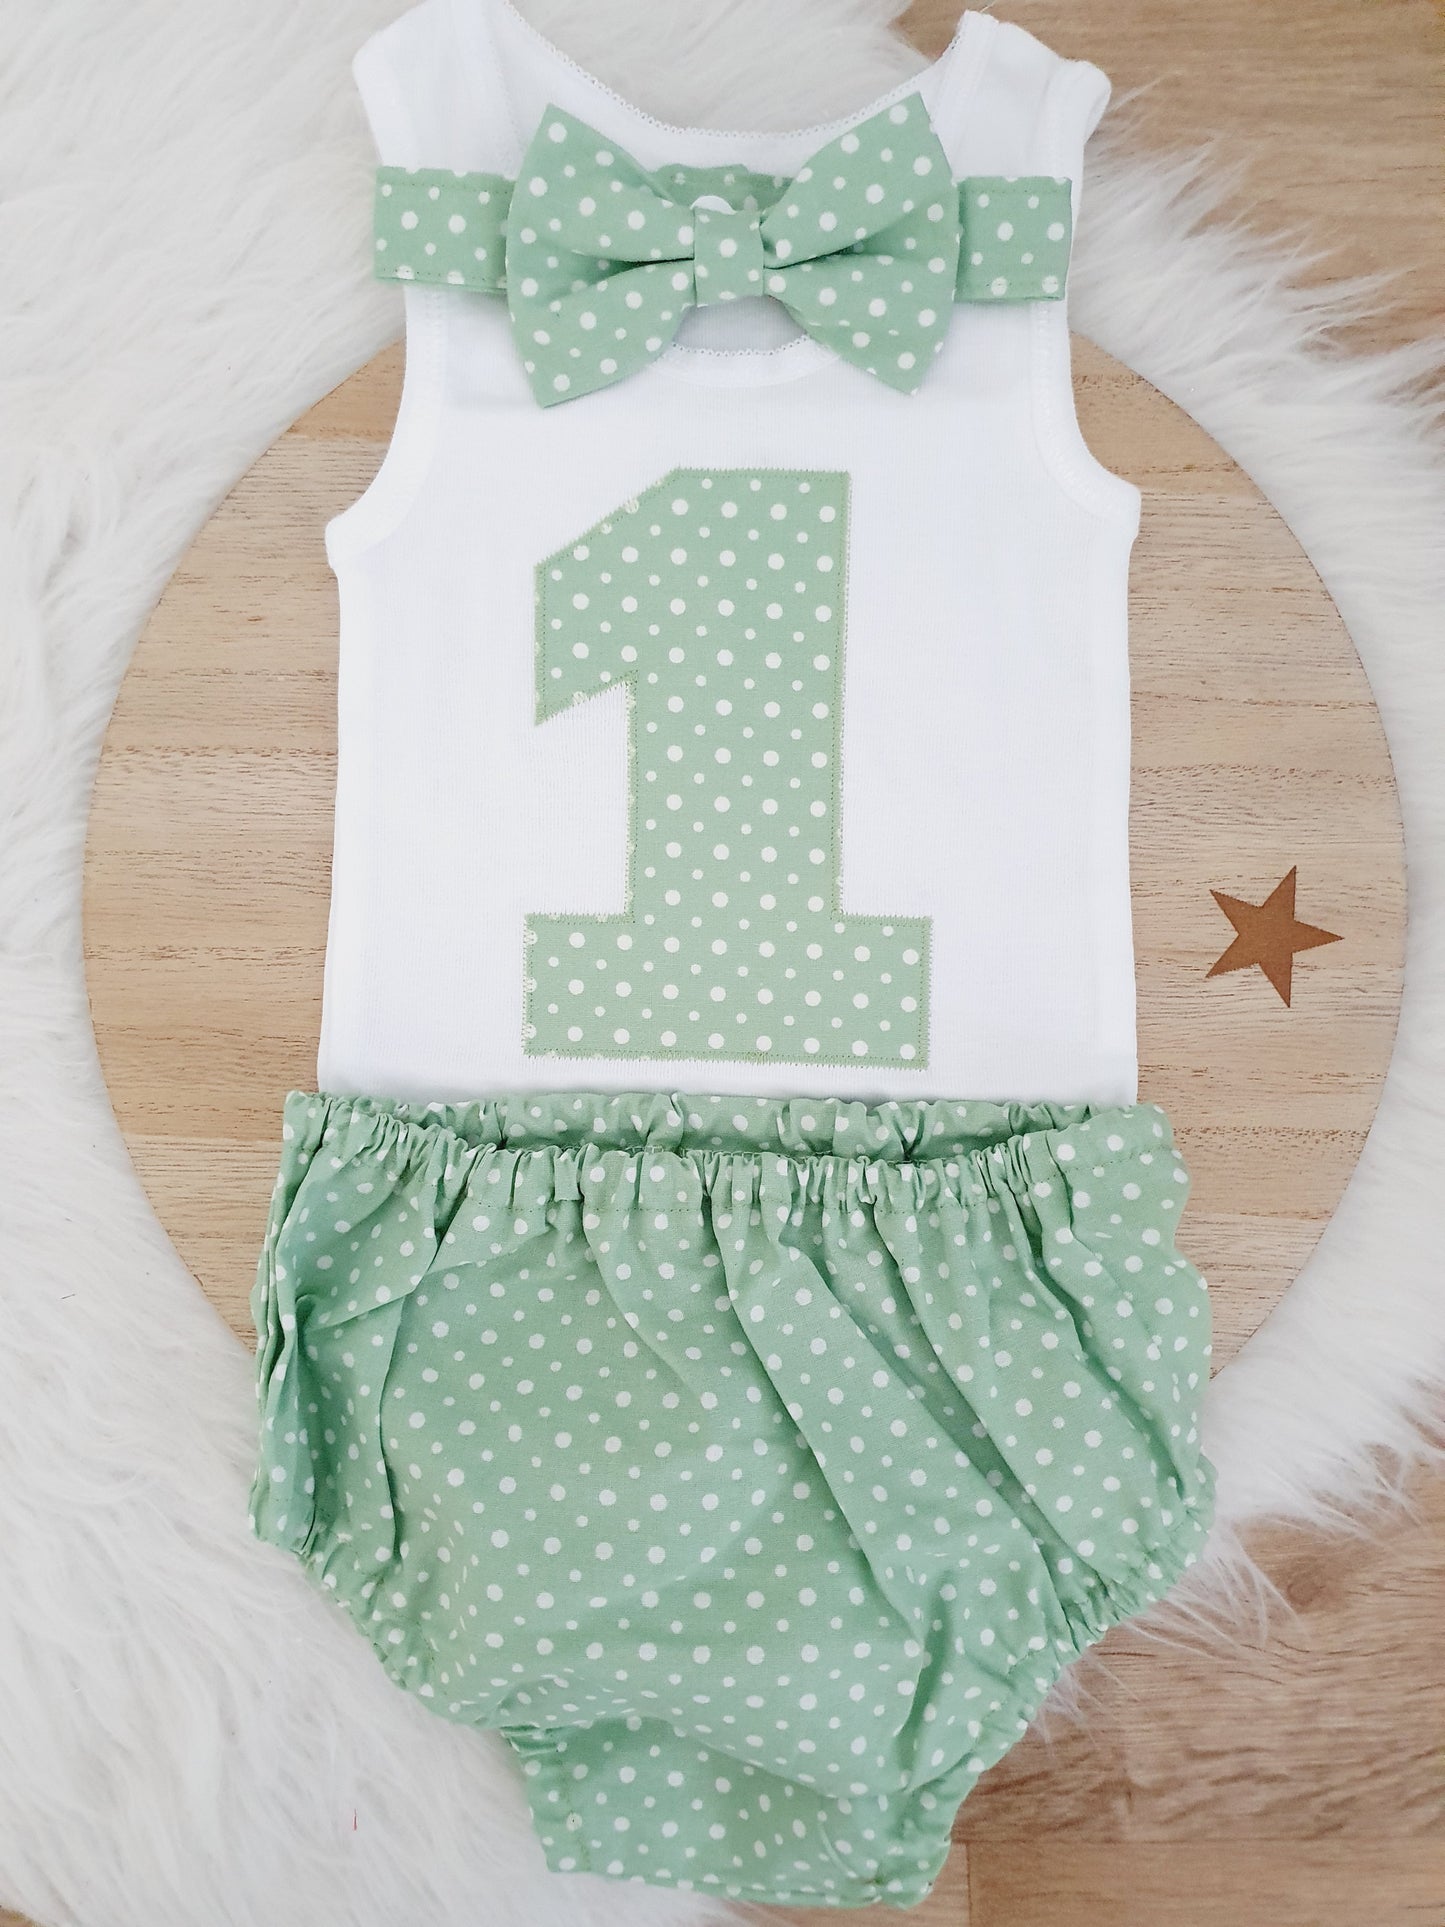 Boys 1st Birthday - Cake Smash Outfit - Size 1, Nappy Cover, Tie & Singlet Set, PALE GREEN